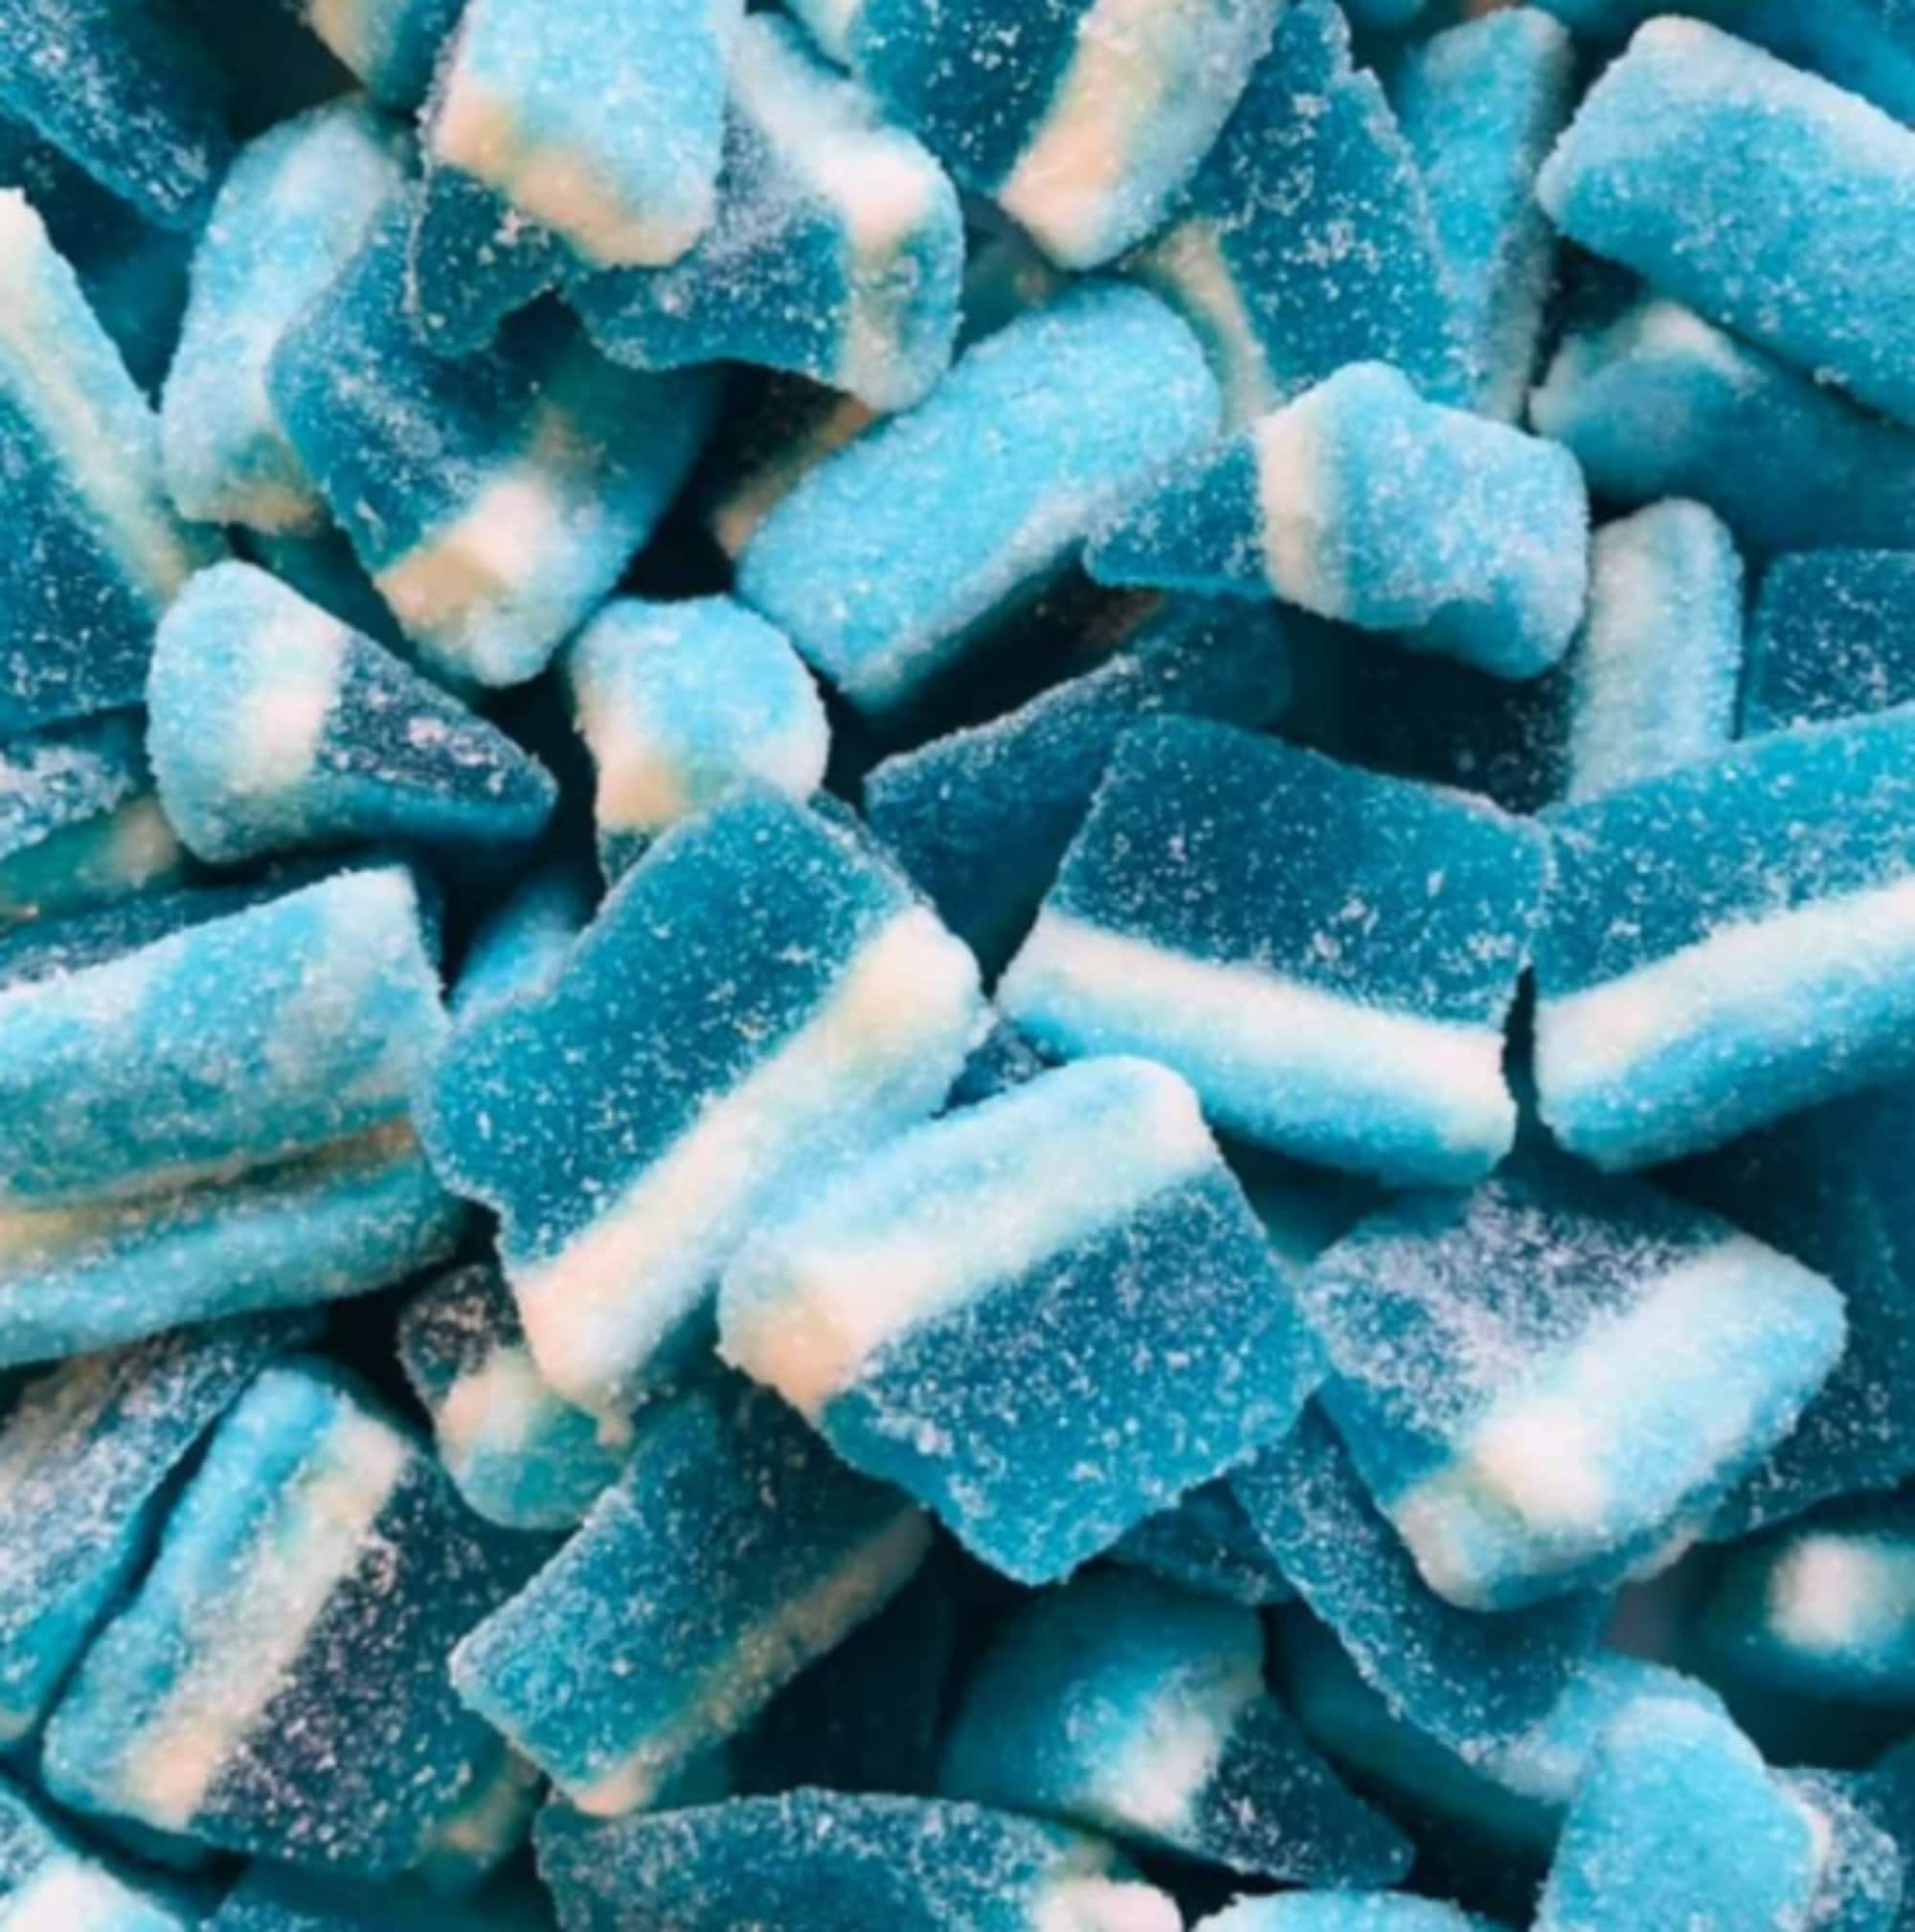 Blue Raspberry Hard Tack Candy, Rock Candy, Old-fashioned